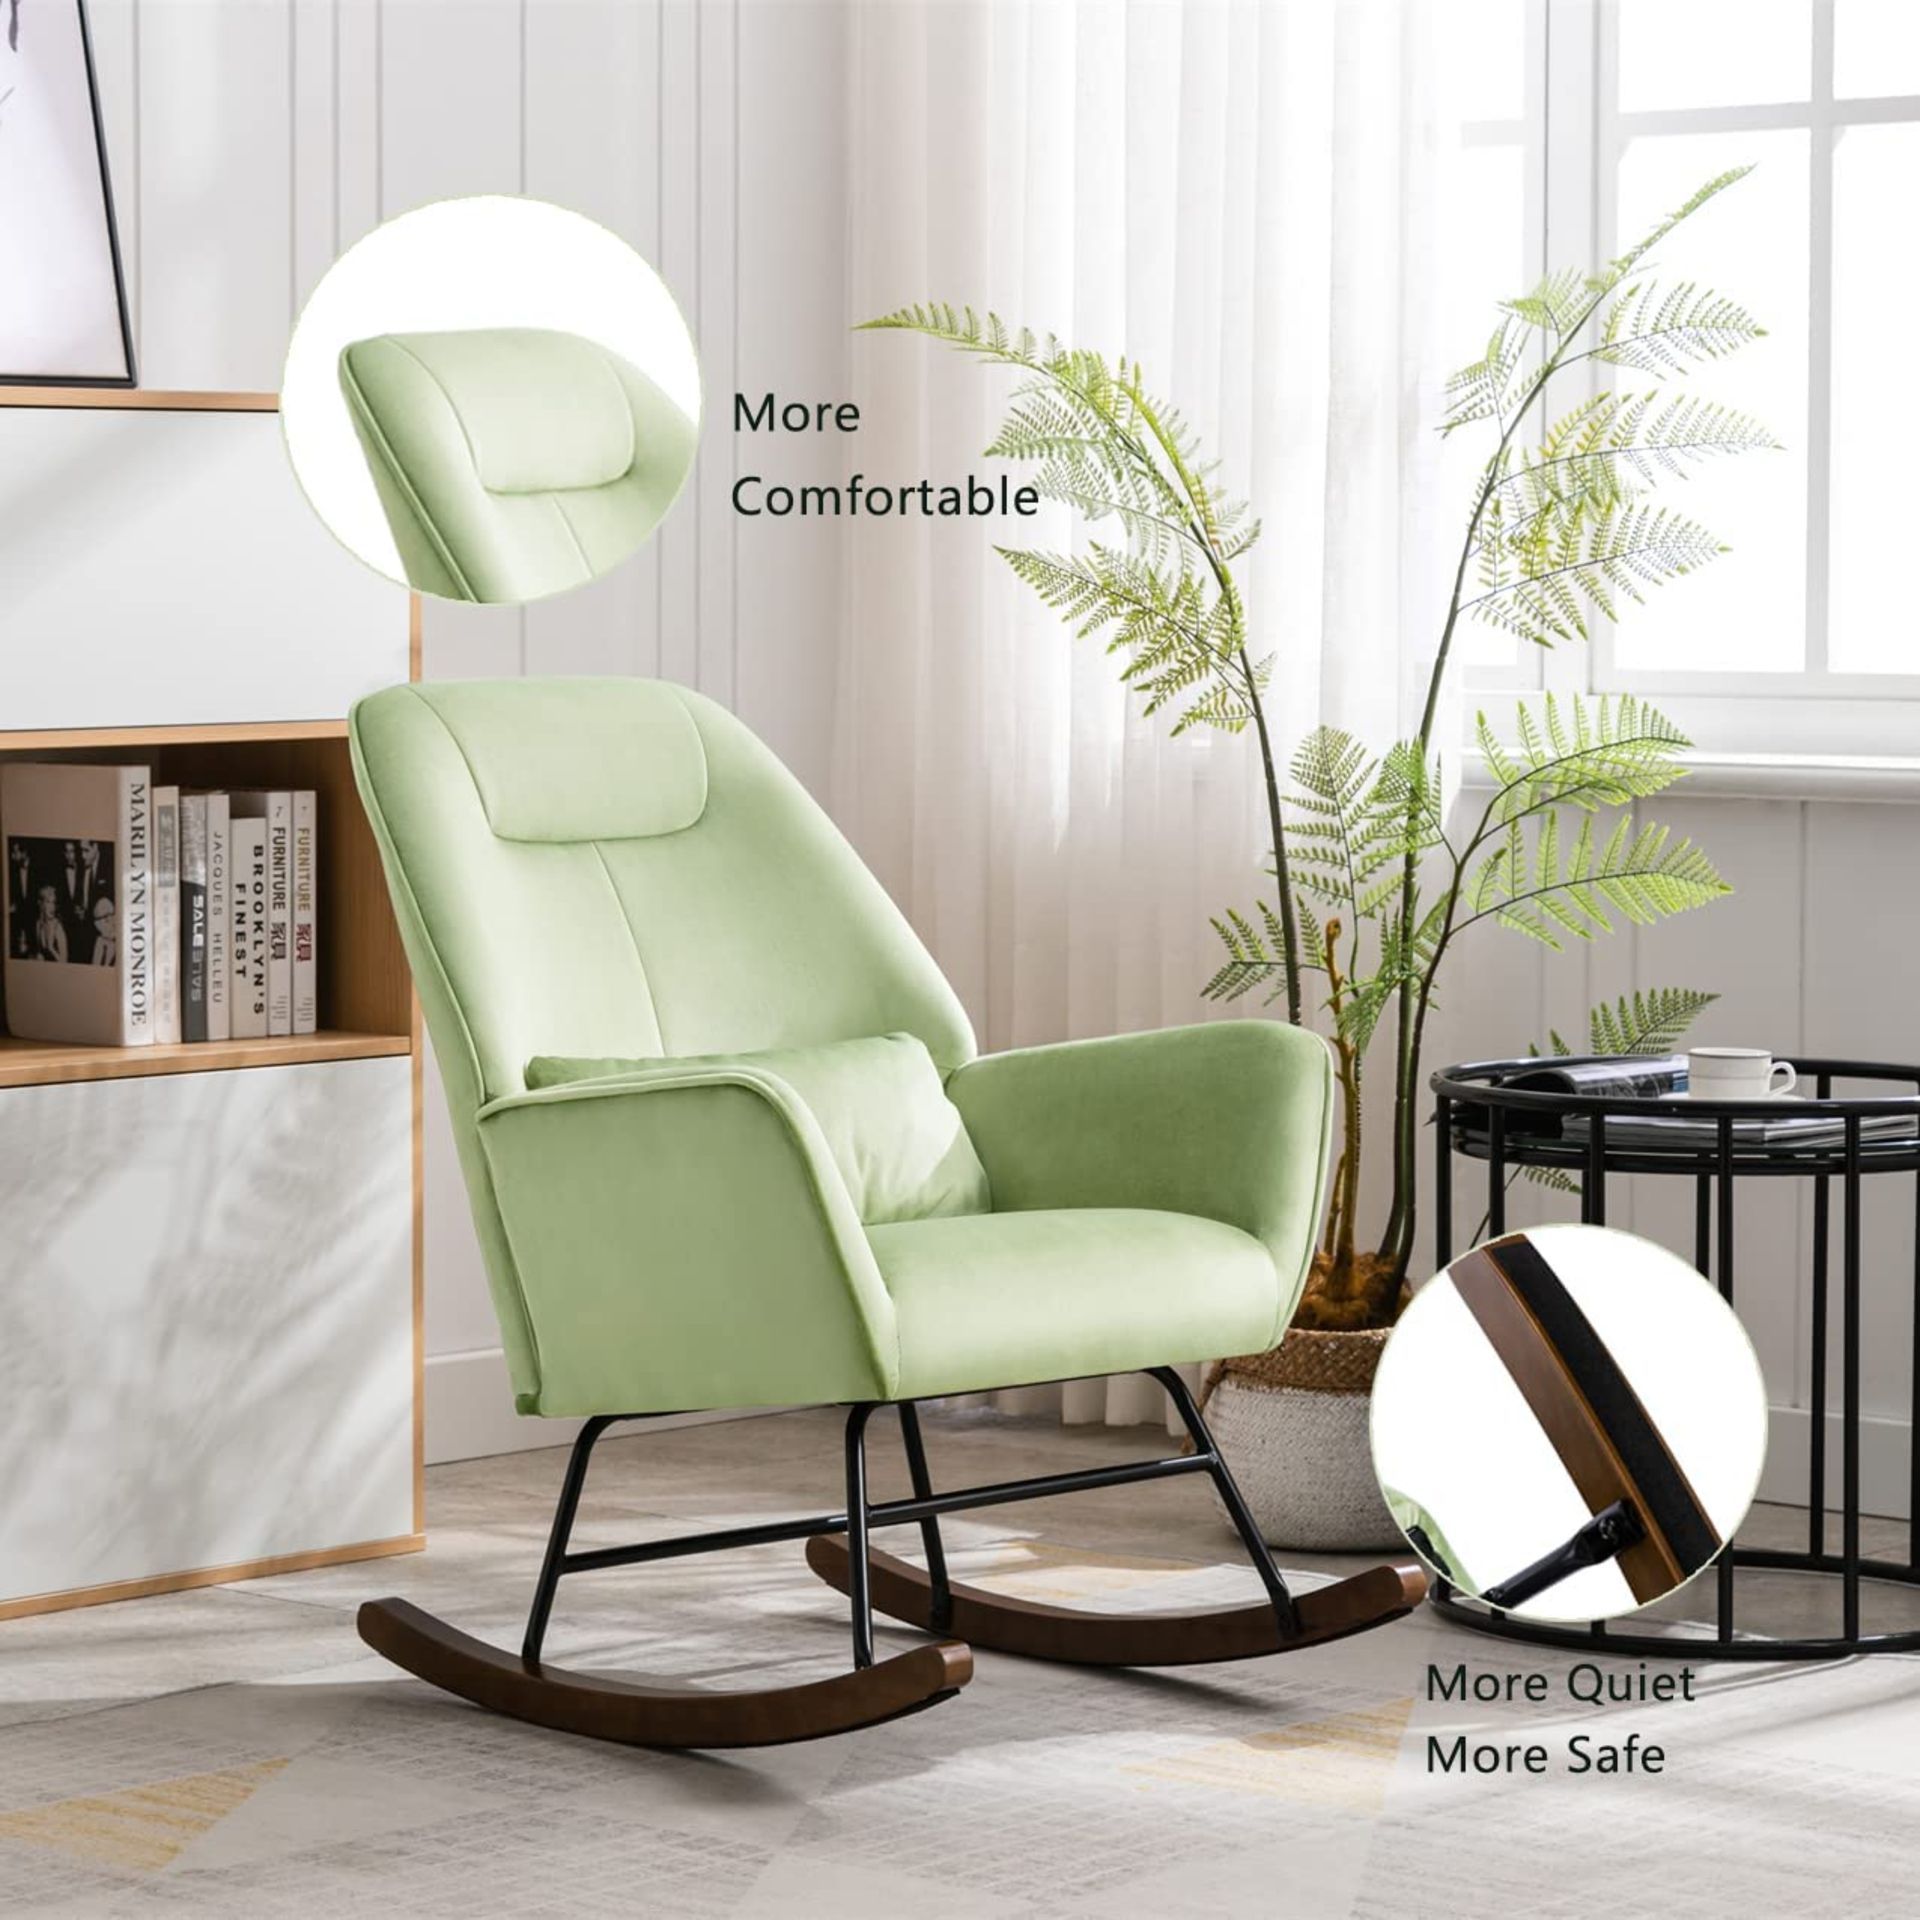 NEW HomeMiYN Velvet Nursery Rocking Chair, Upholstered Reading Wingback Accent Chair for Baby - Image 4 of 4